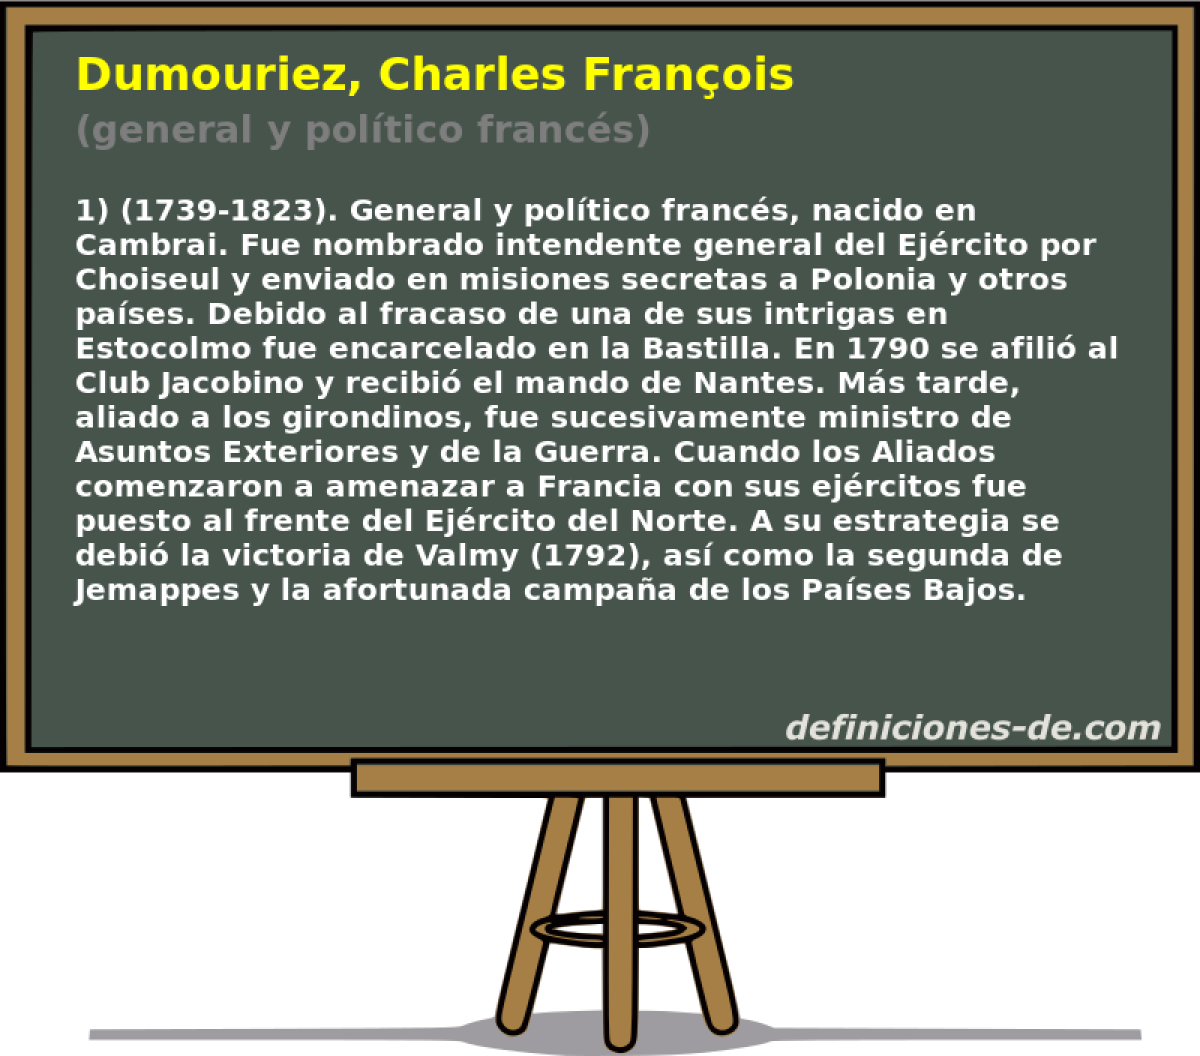 Dumouriez, Charles Franois (general y poltico francs)